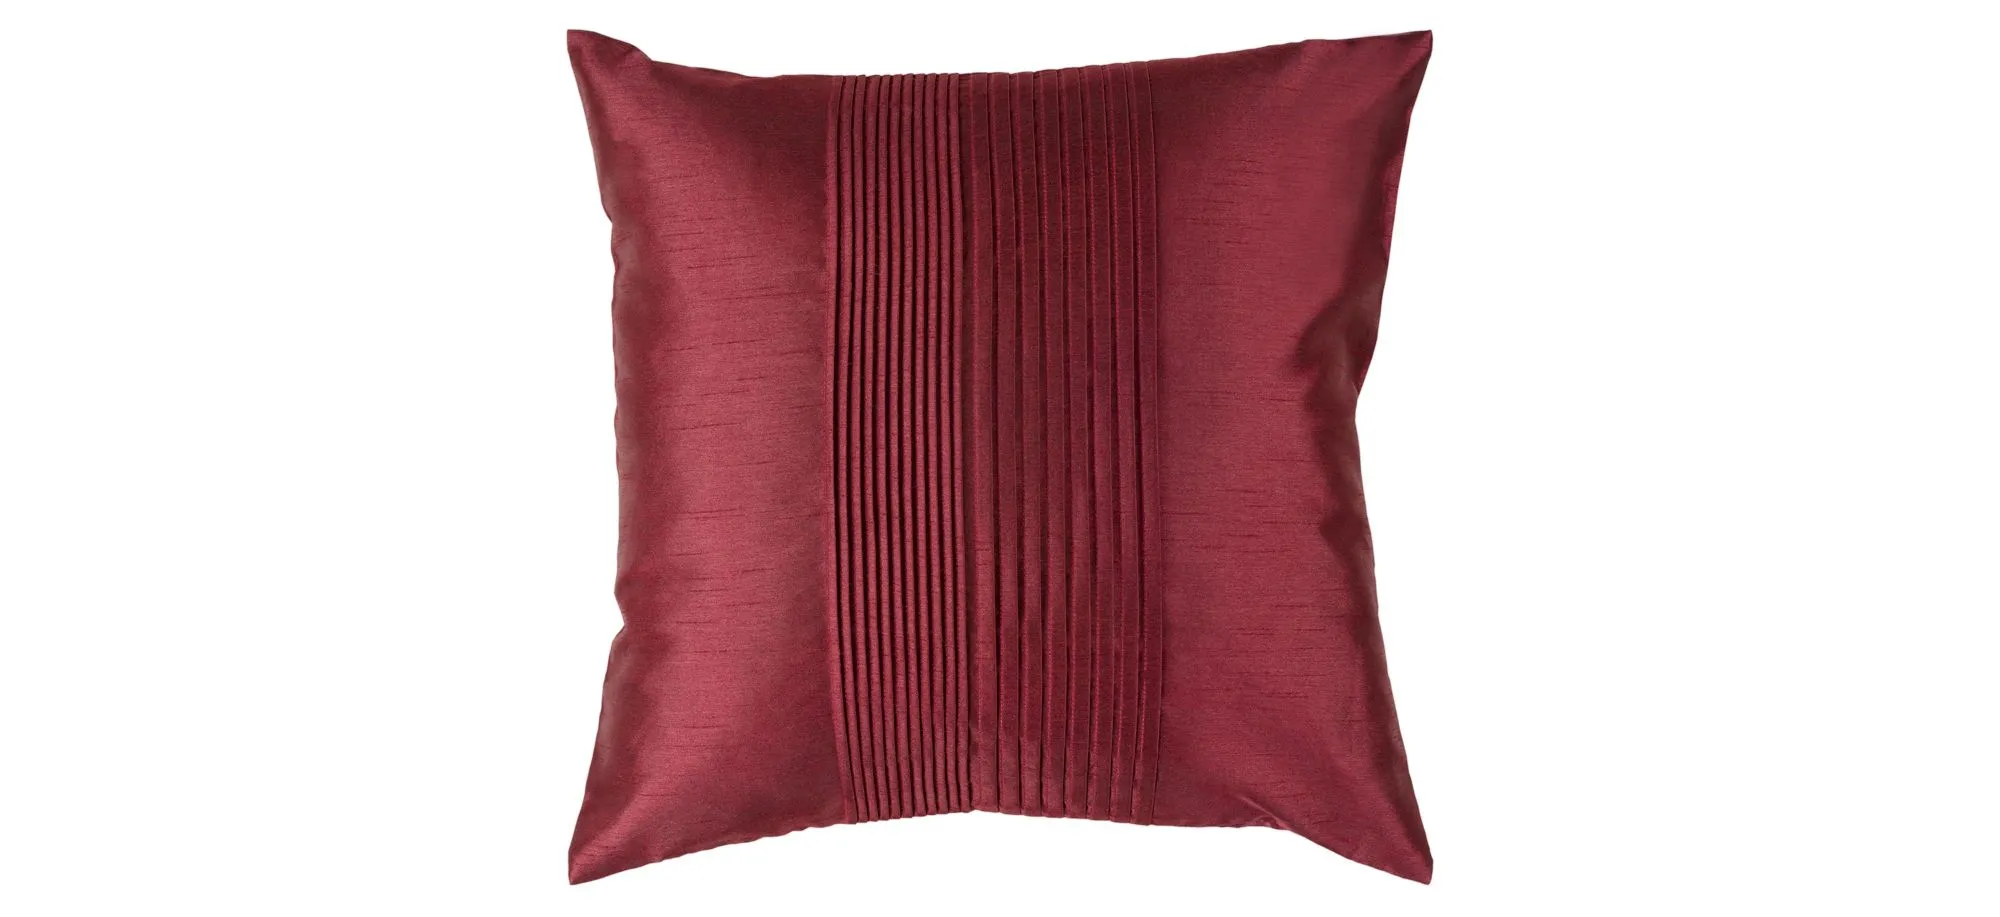 Solid Pleated 18" Throw Pillow in Garnet by Surya